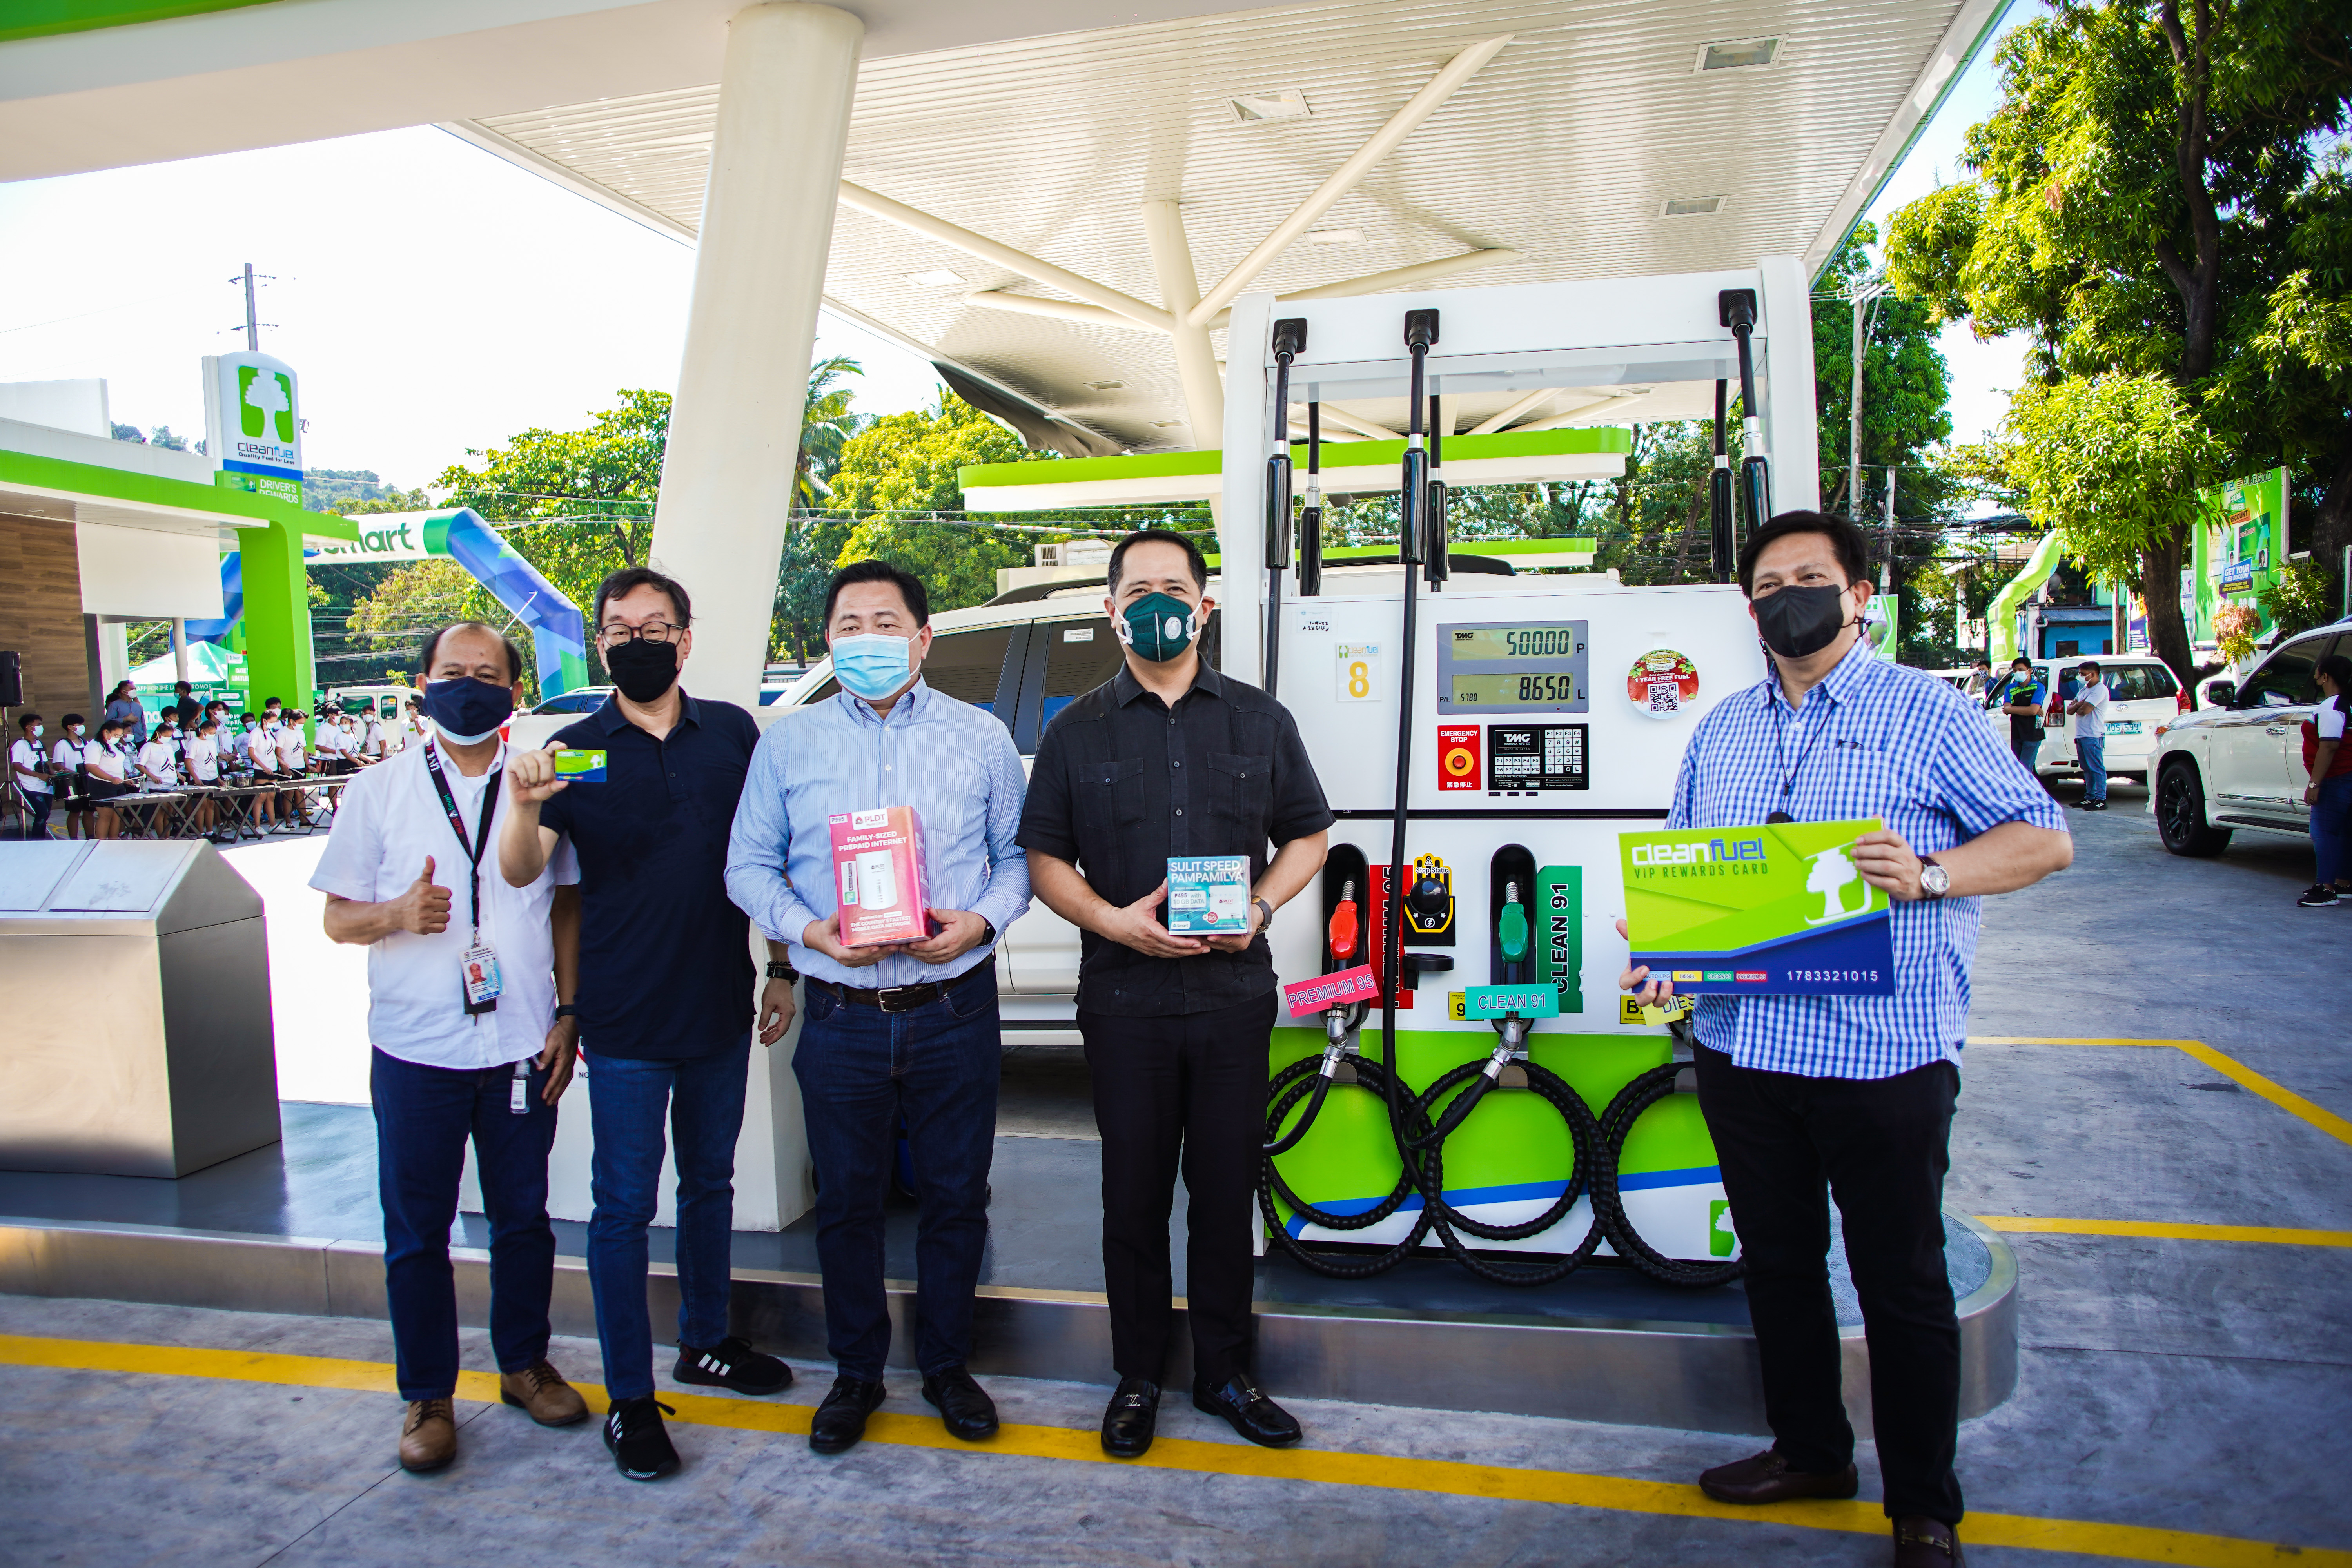 Smart, Cleanfuel ink tie-up program to deliver affordable connectivity solutions